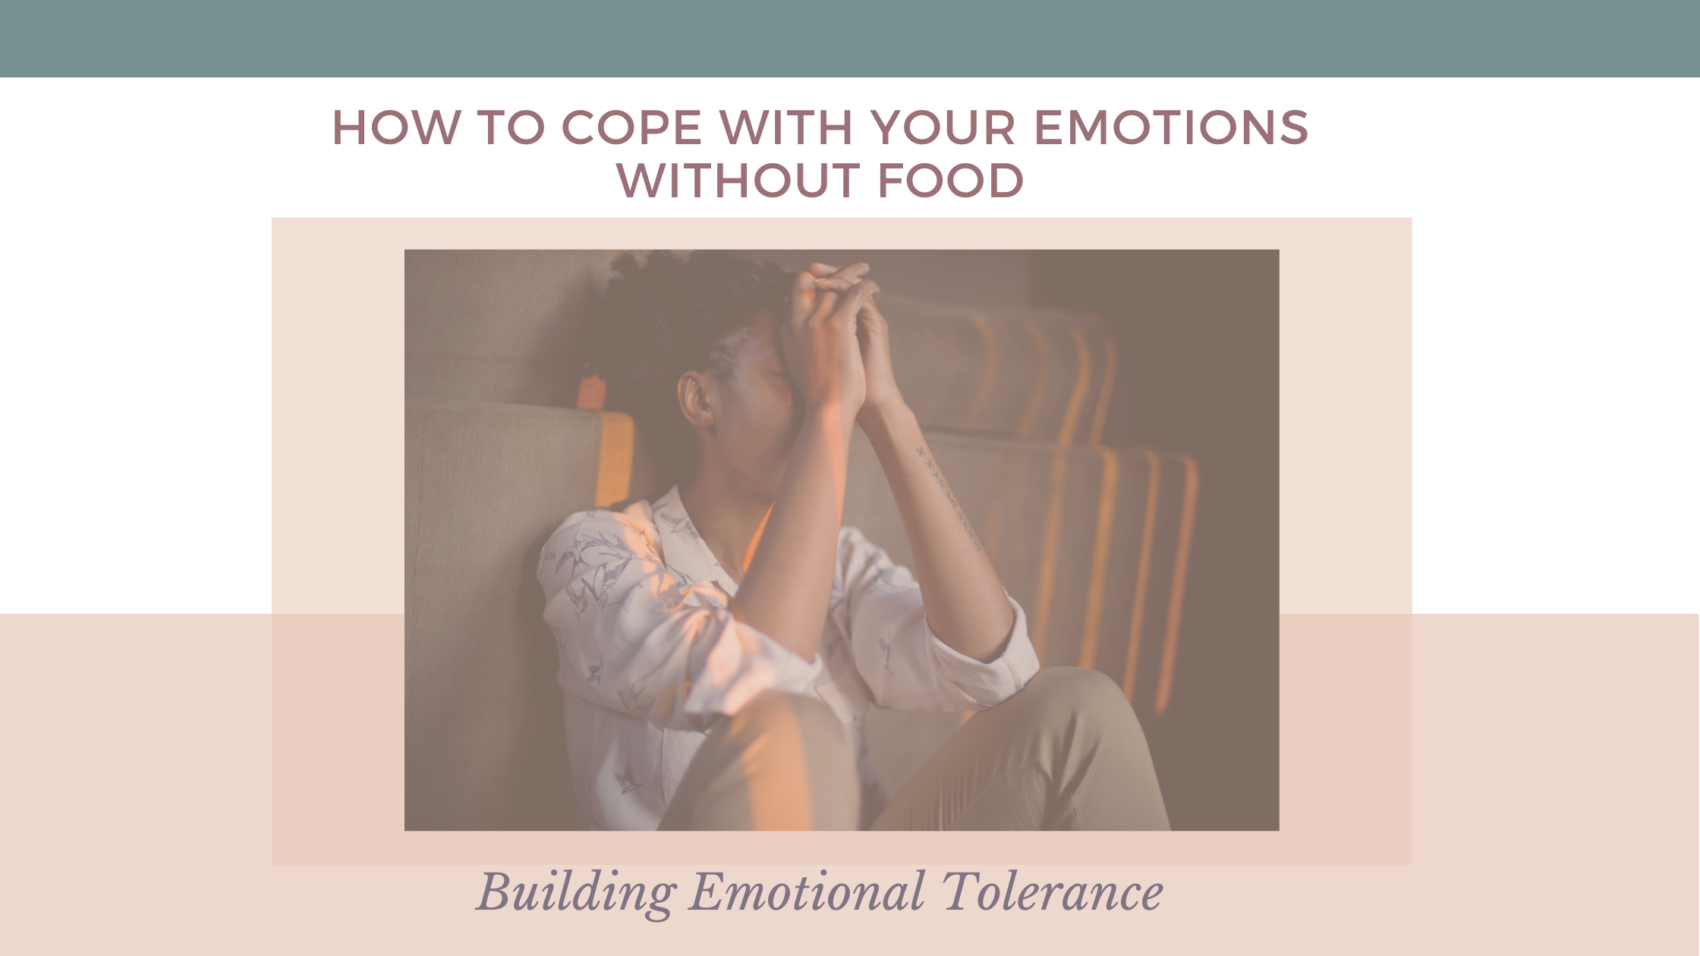 How to cope with emotions without food